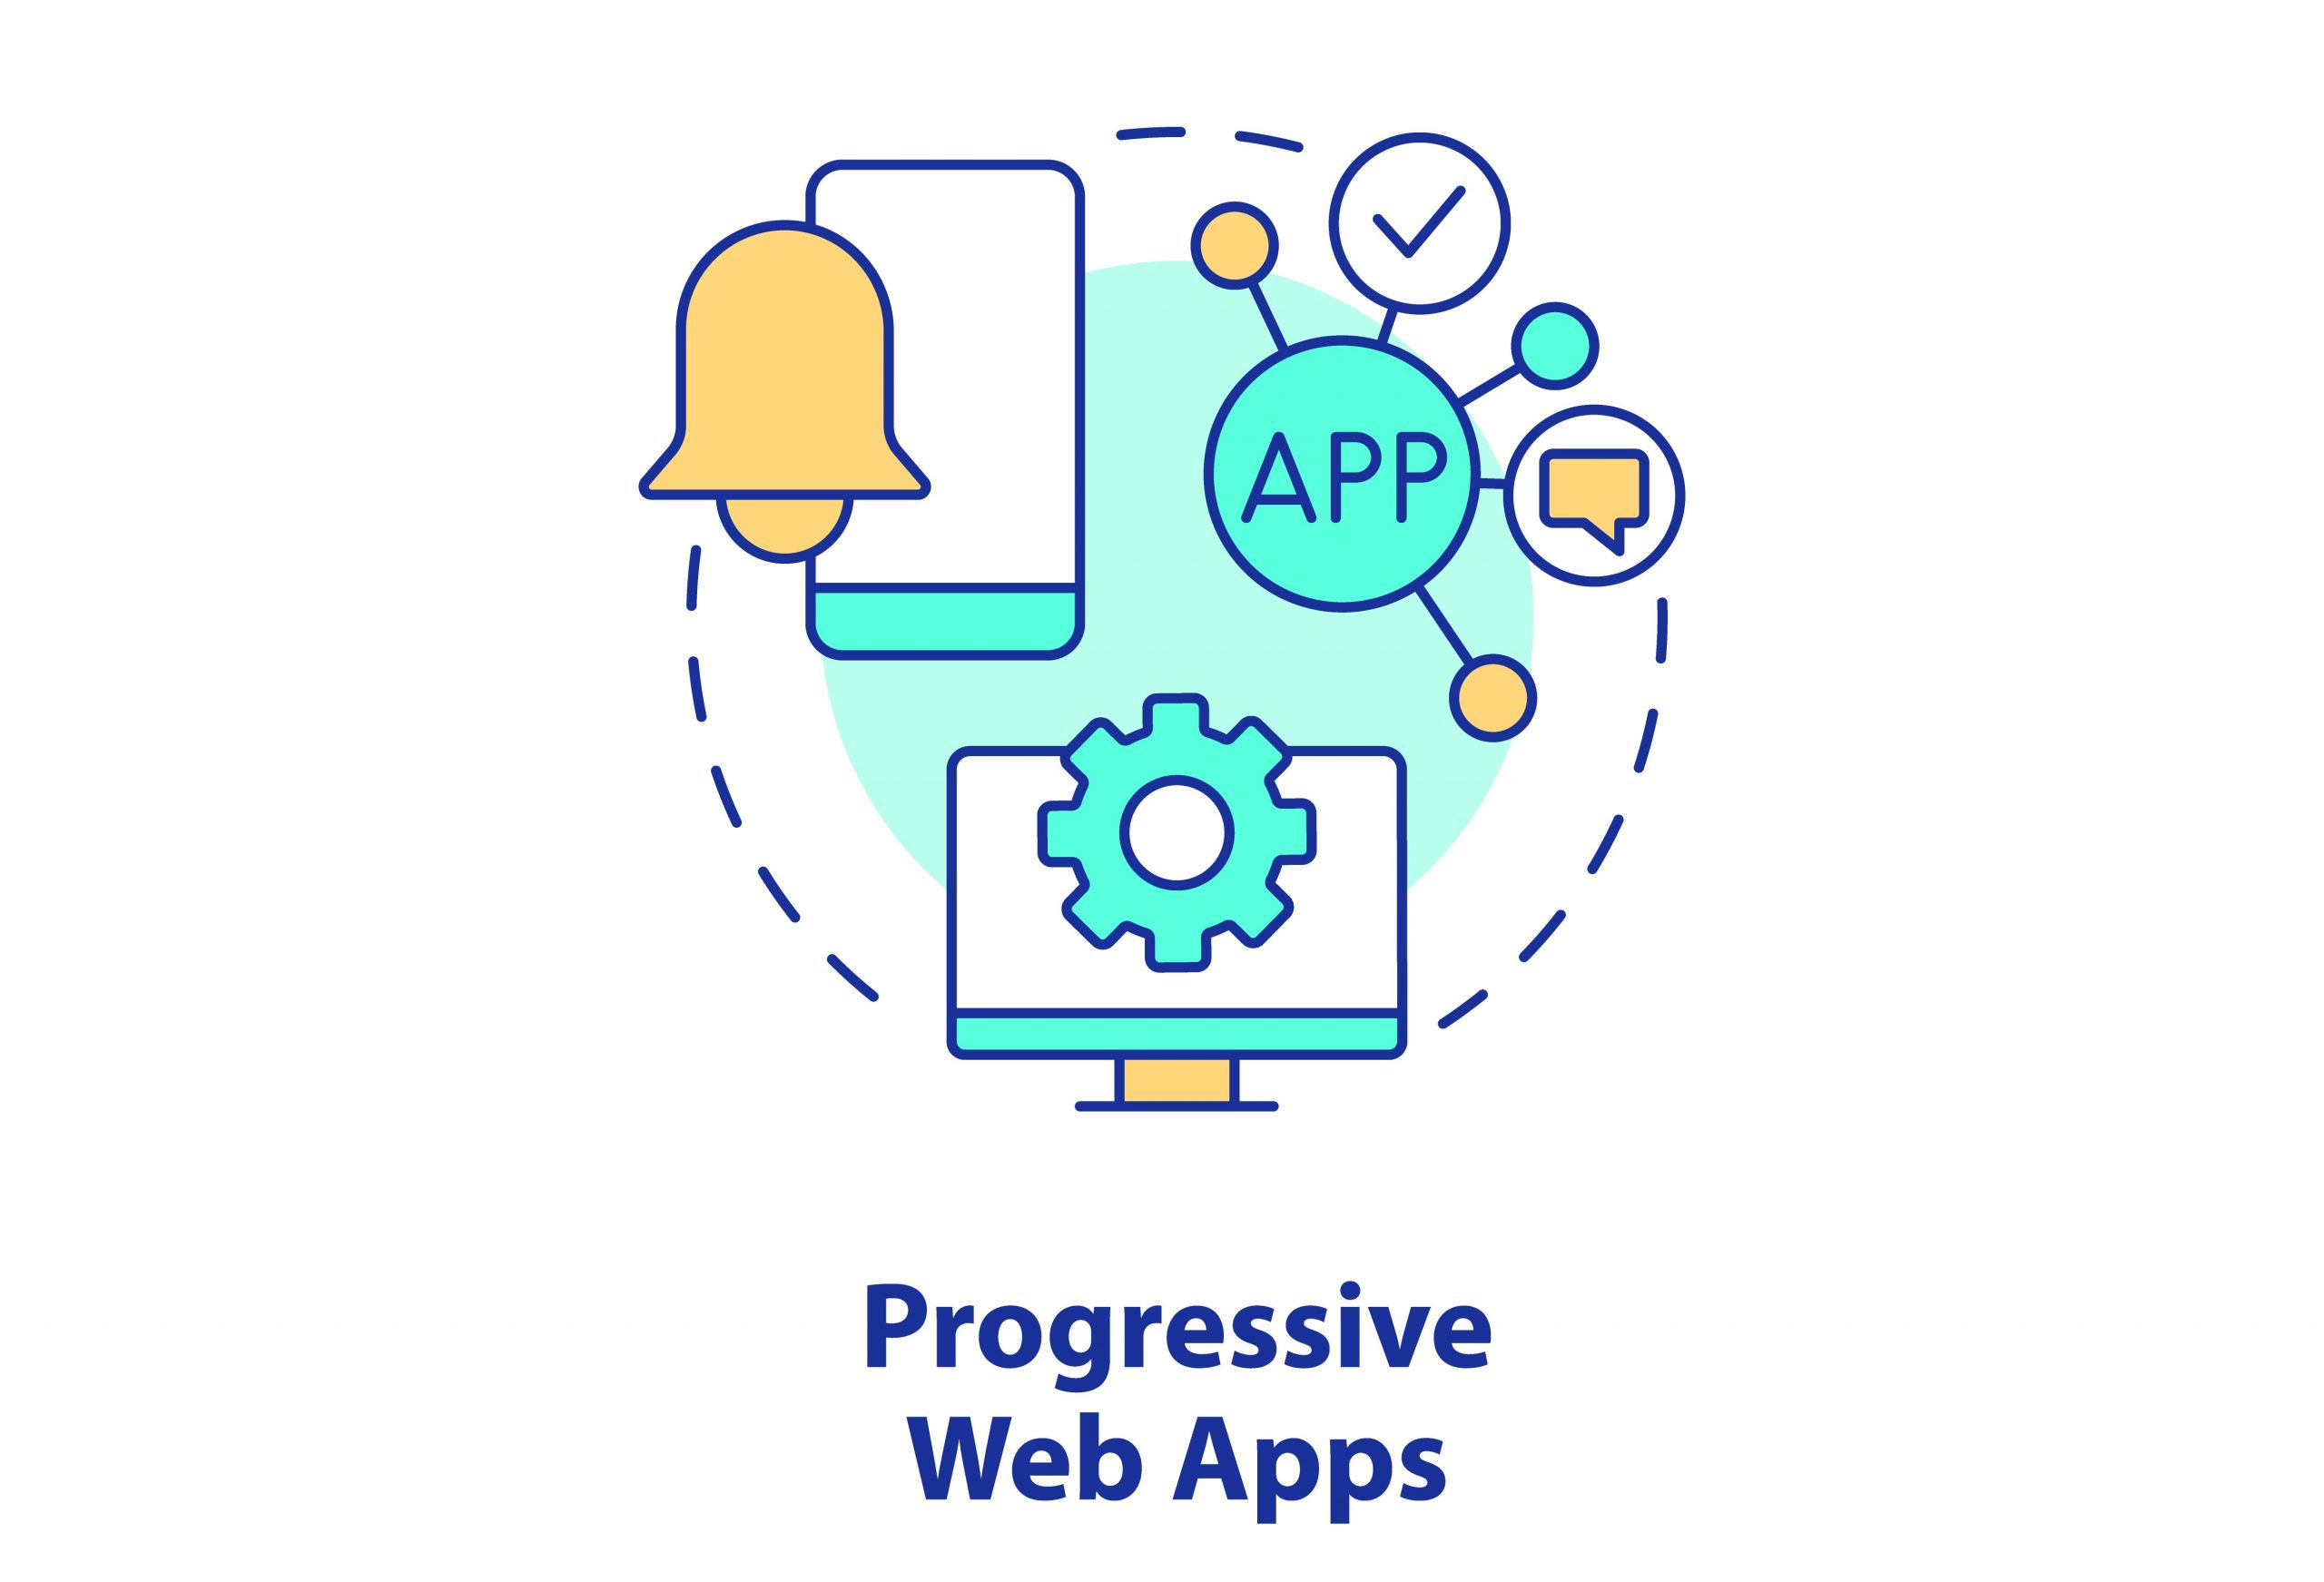 Progressive Web Apps (PWAs) are the next level of regular web apps, combining the best of both desktop and mobile platforms to deliver a high-end web and app experience.